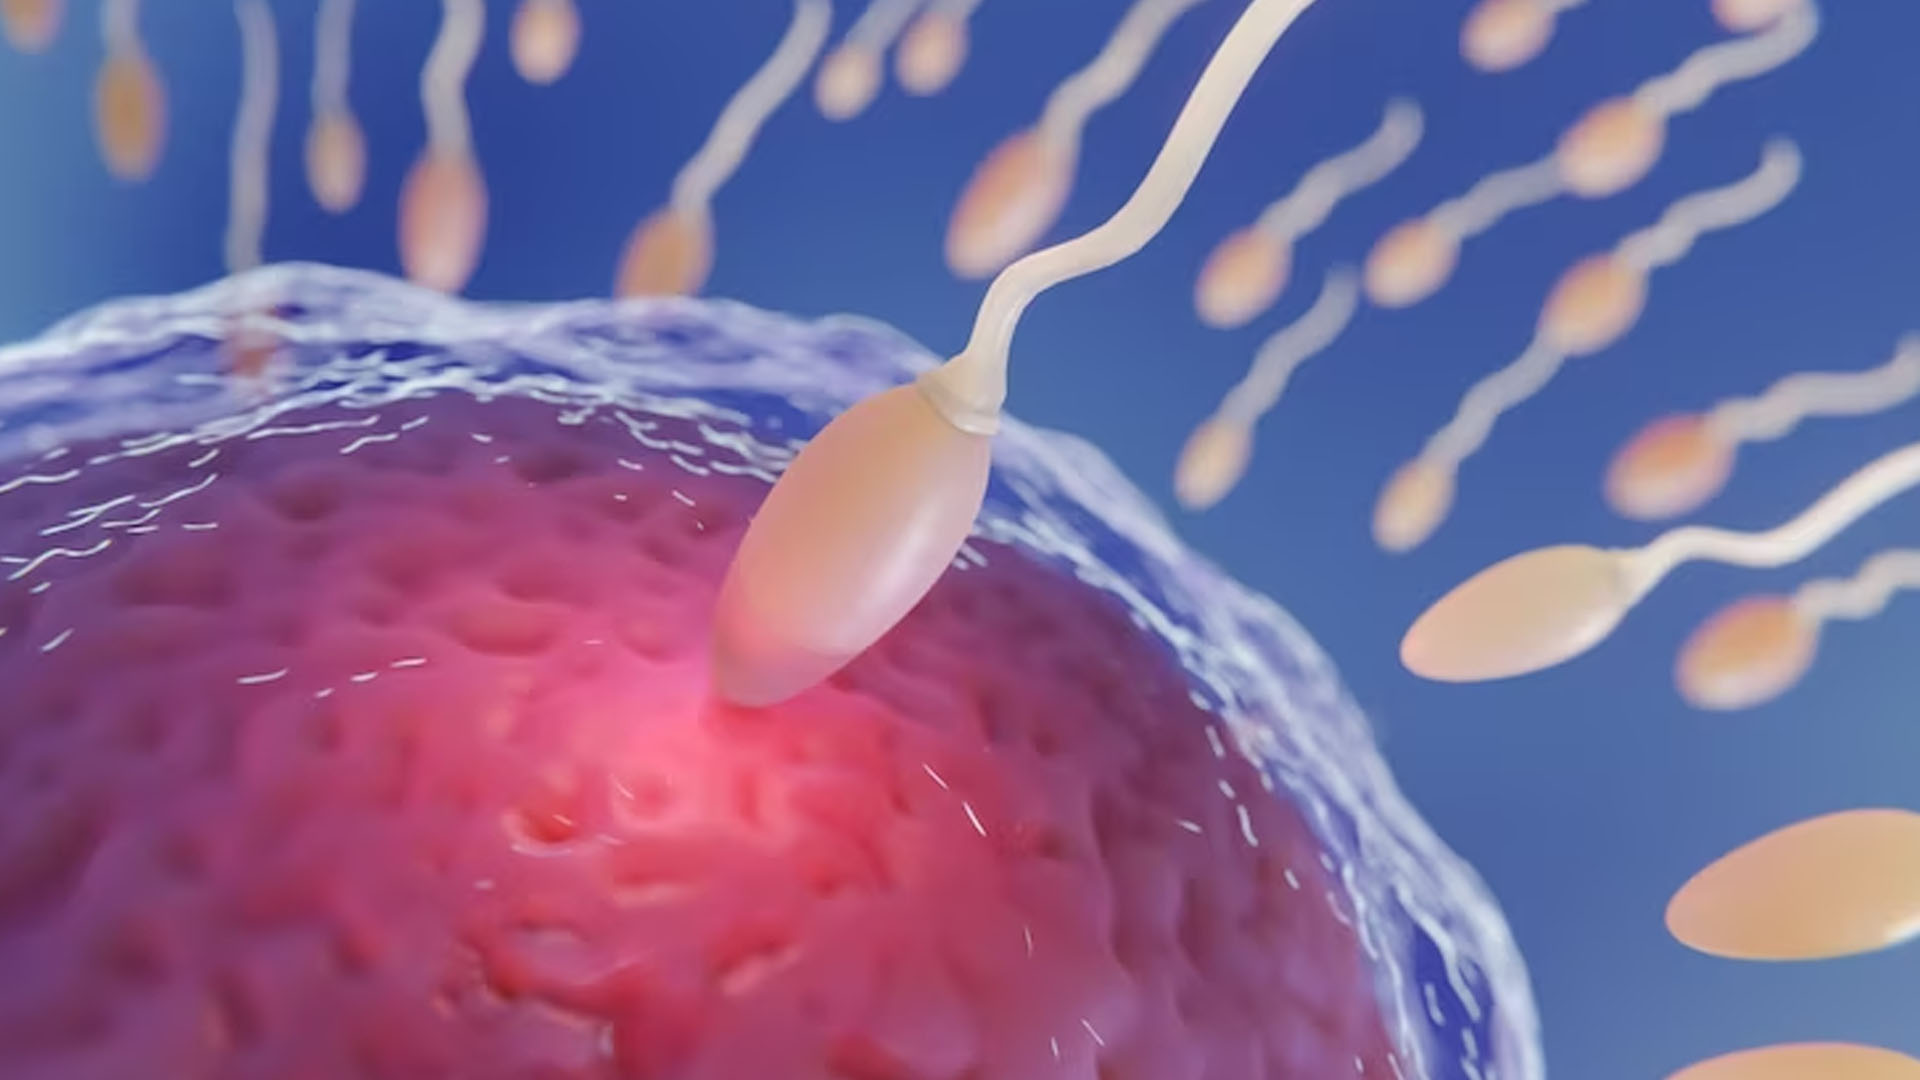 What Are The Symptoms That Indicate Fertilization, When Sperm Meets The Egg?